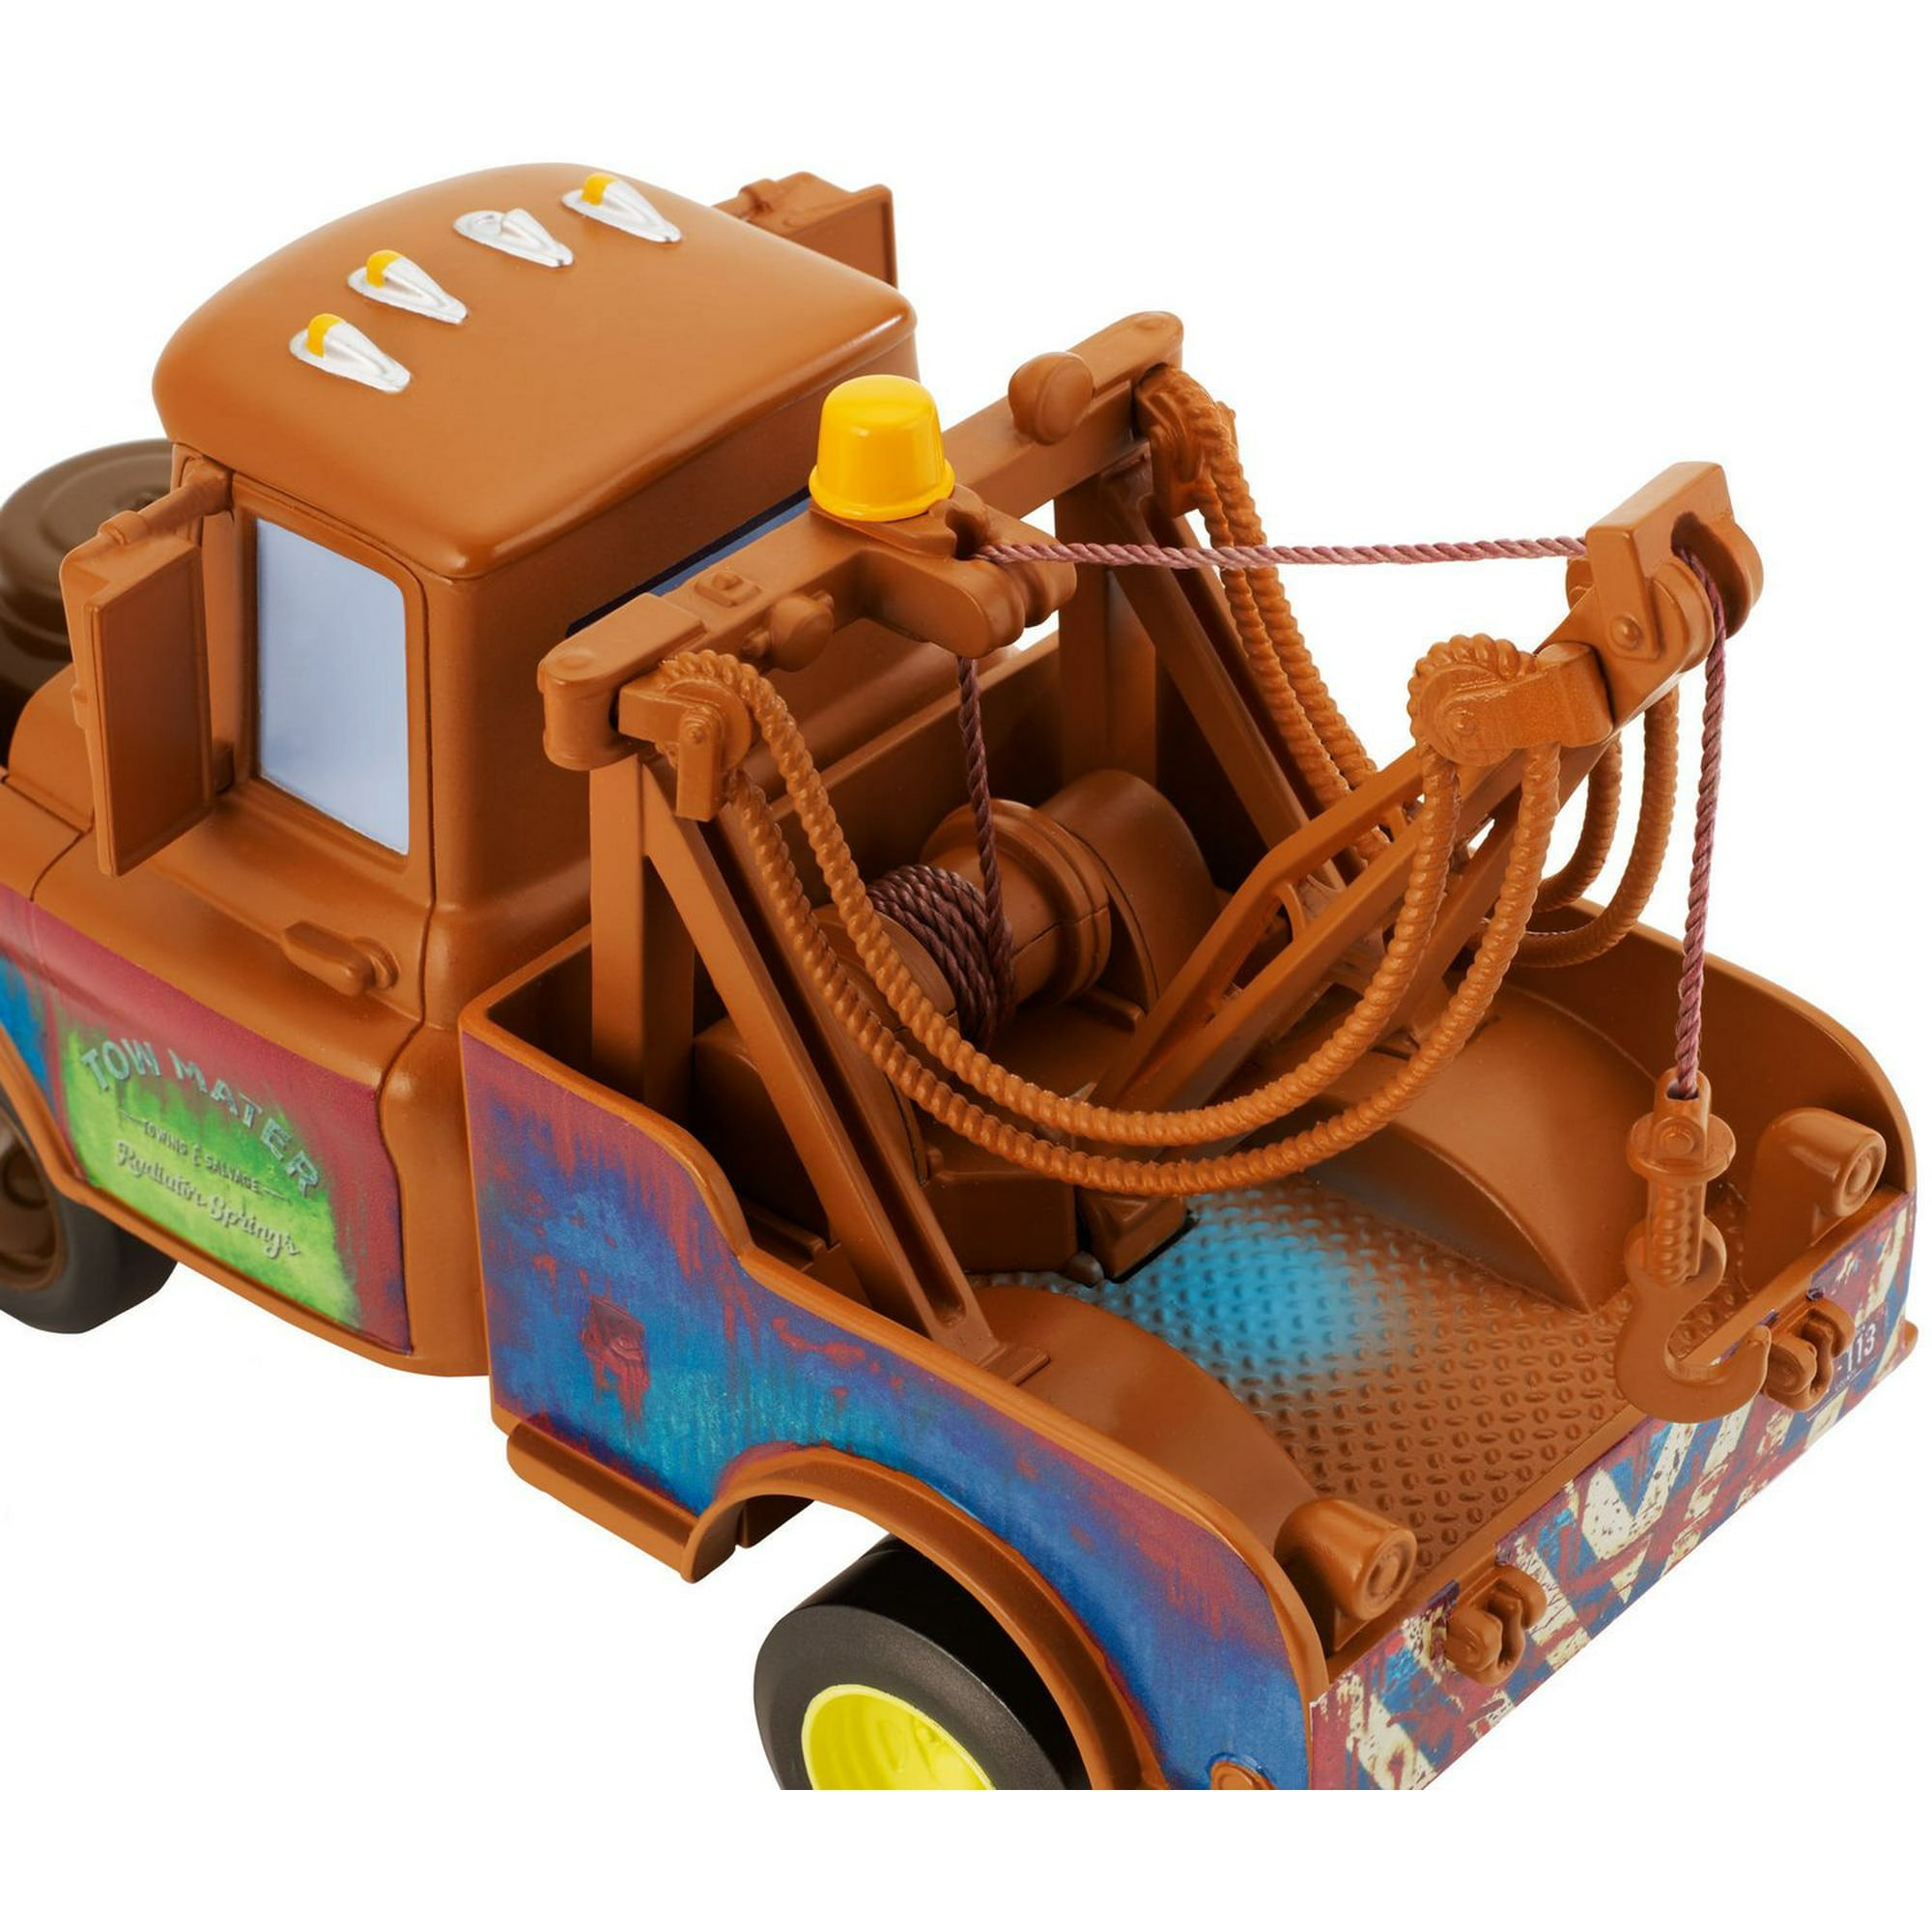  Mattel Disney and Pixar Cars Moving Moments Toy Truck